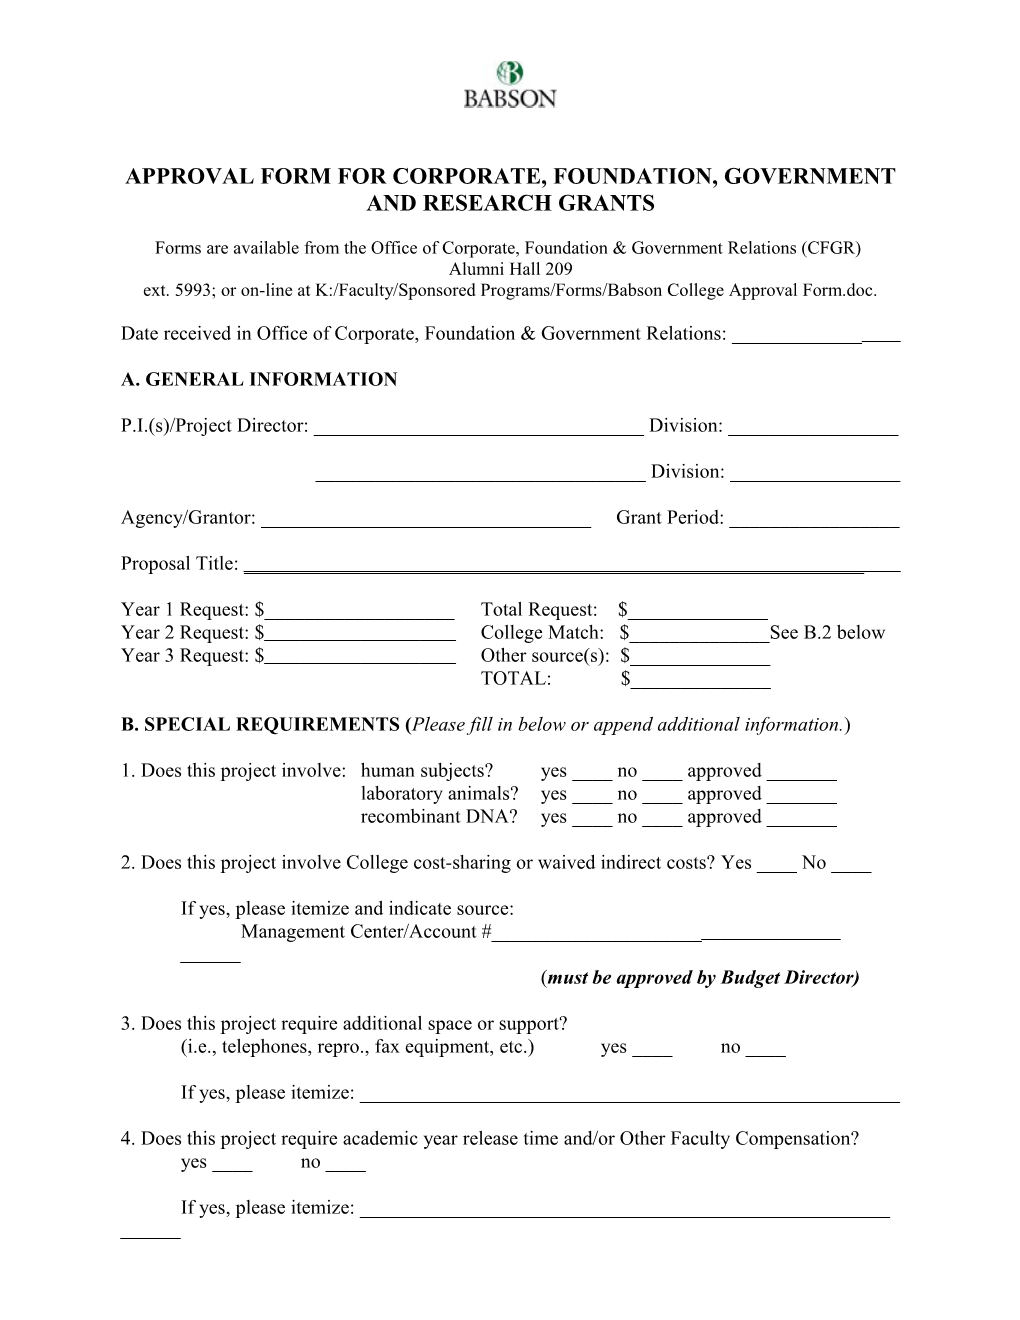 Babson College Approval Form